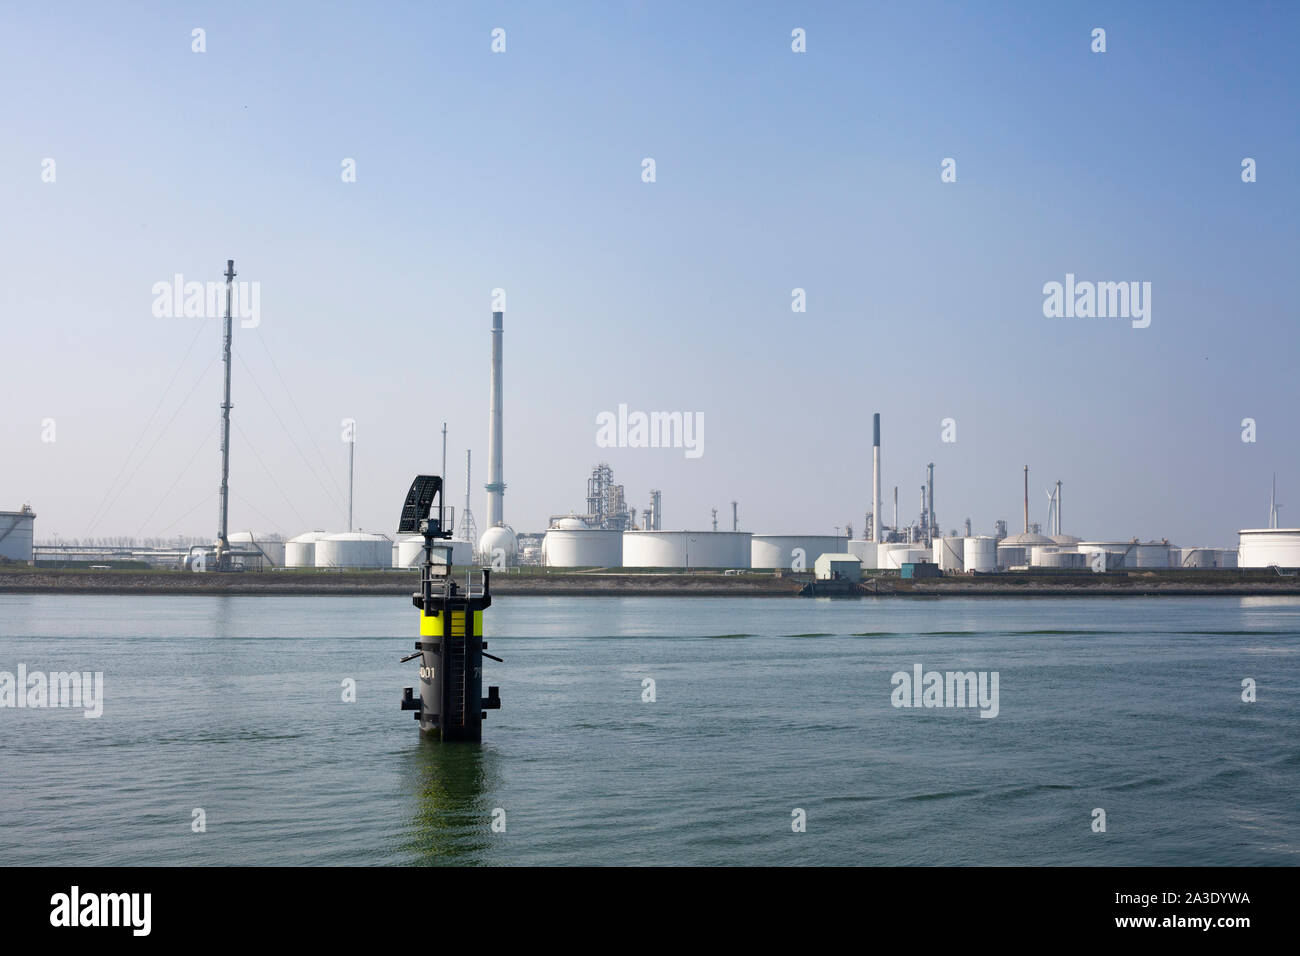 Berth - a place near the shore for mooring a vessel or boats in the Port of Rotterdam Stock Photo